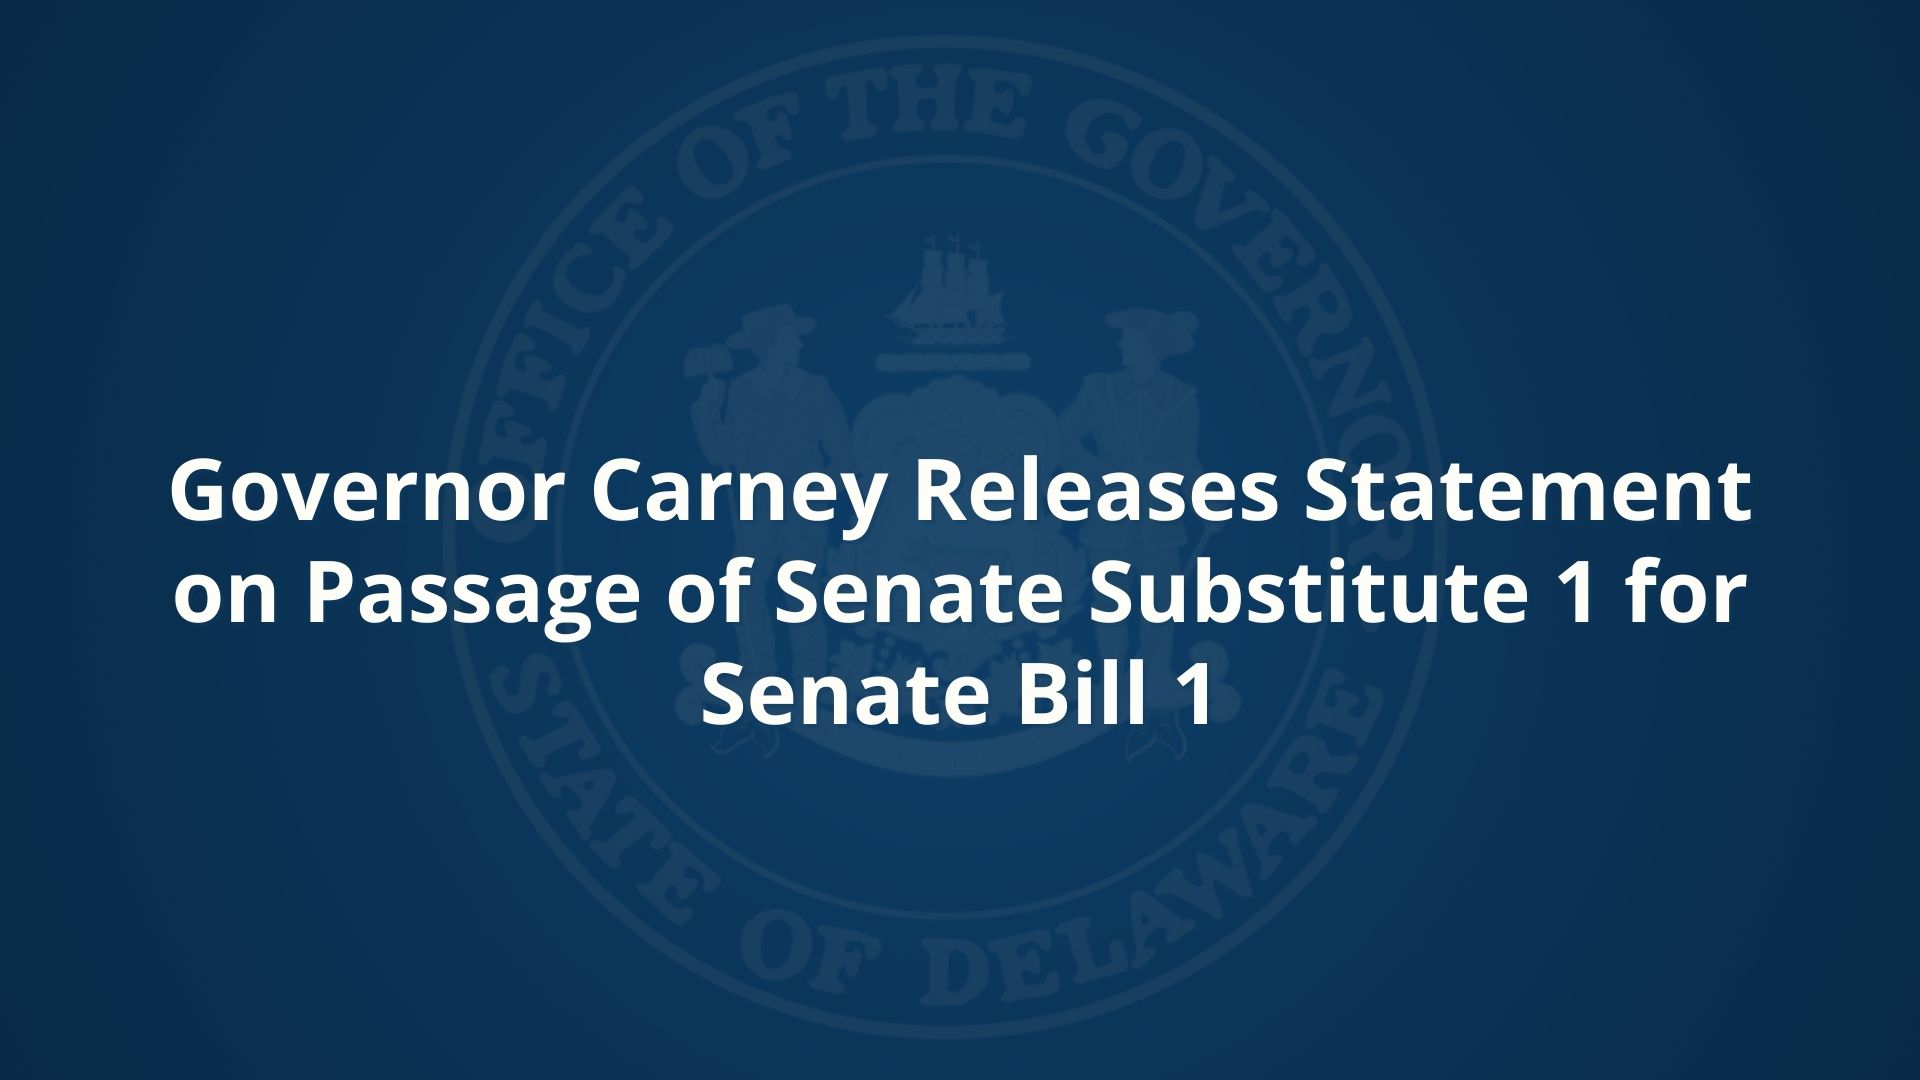 Governor Carney Releases Statement on Passage of Senate Substitute 1 for Senate Bill 1